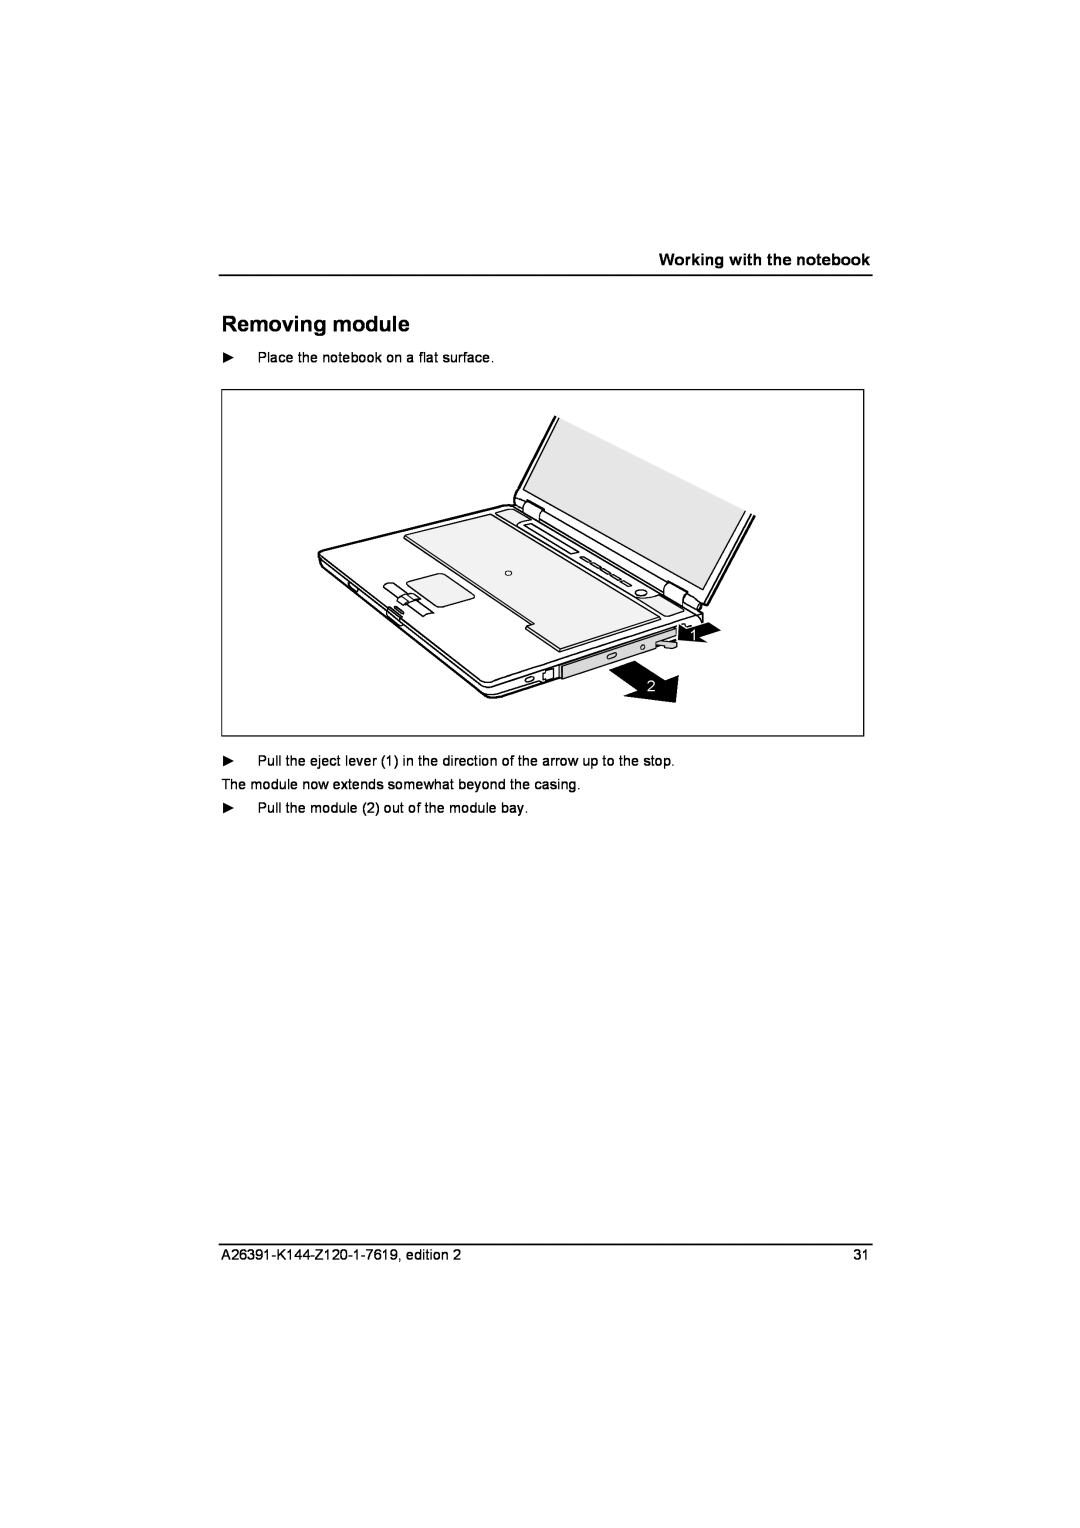 Fujitsu S SERIES manual Removing module, Working with the notebook 